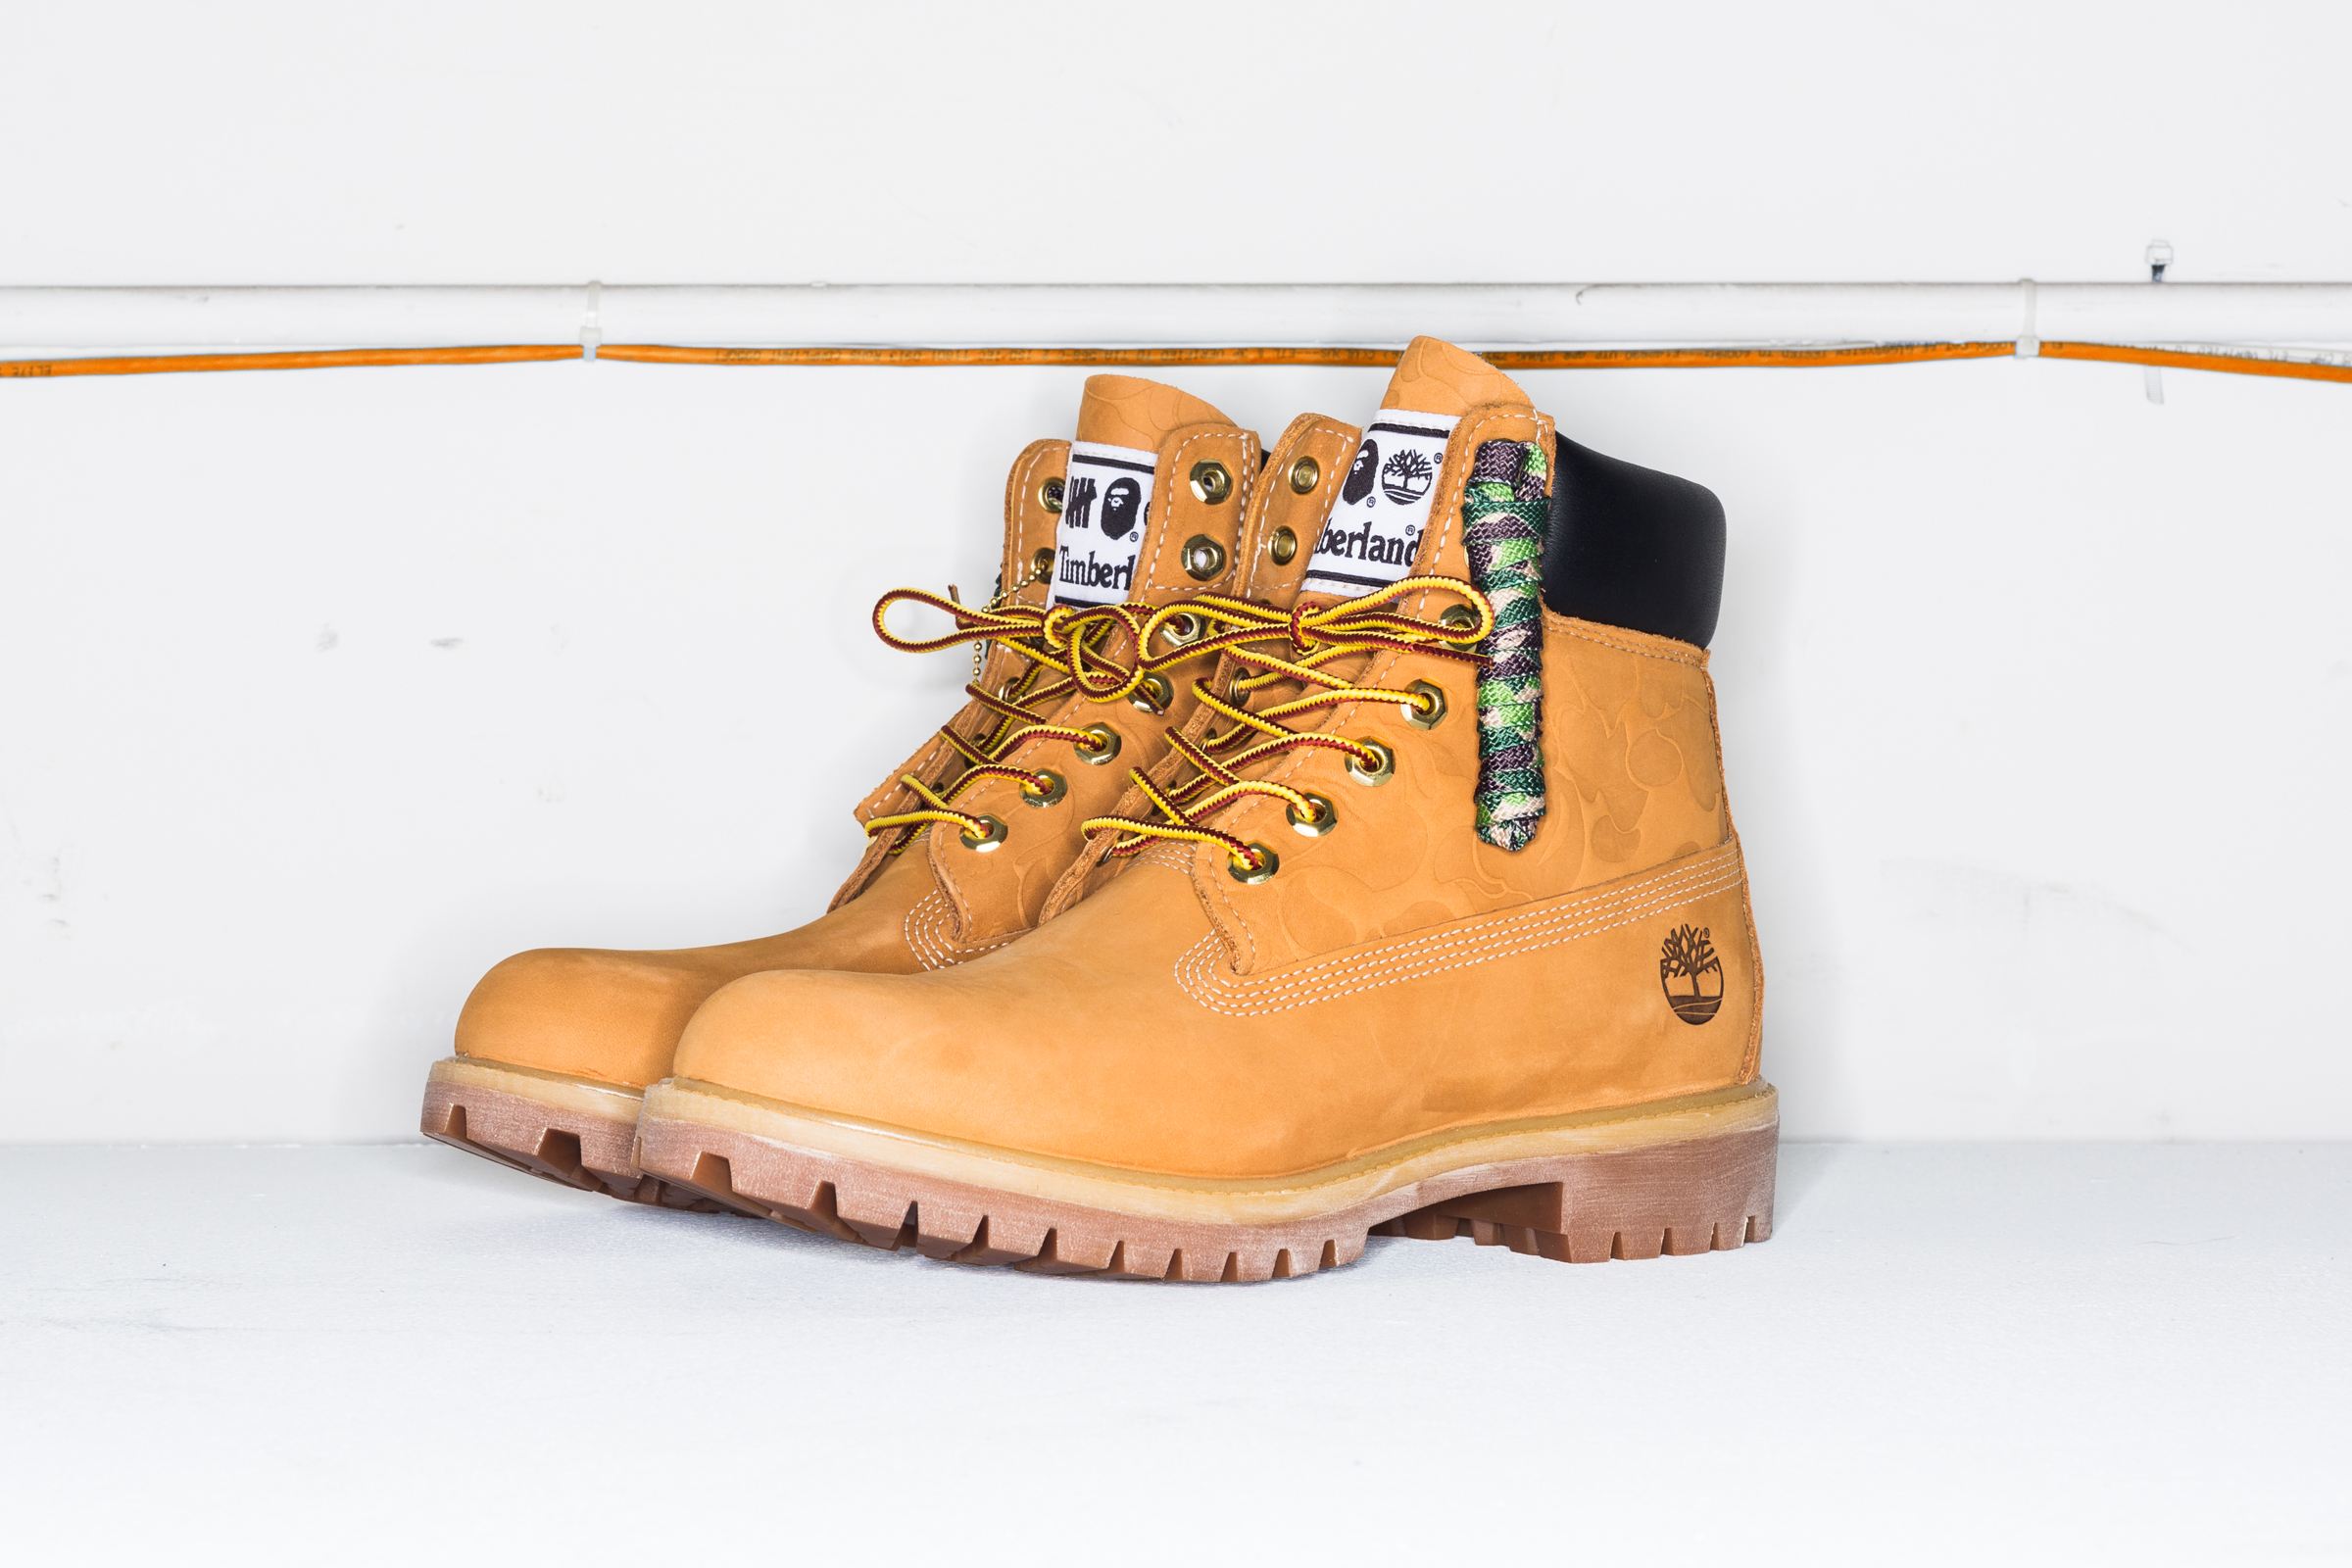 classic timbs